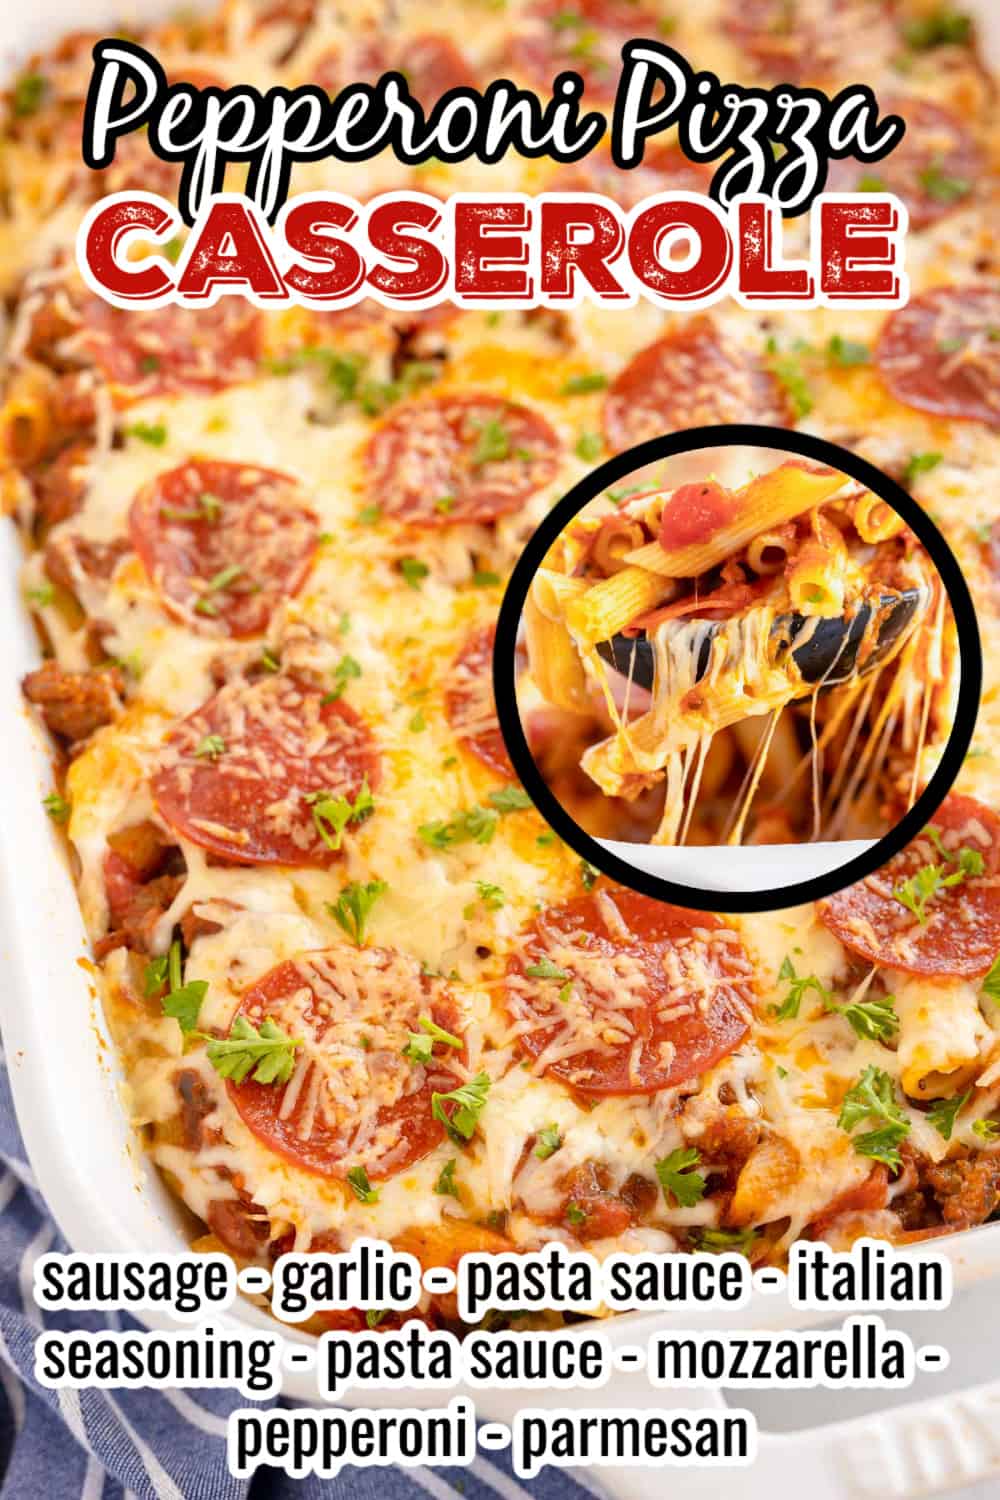 Pizza casserole in a white dish with ingredients and recipe name overlaid in text.